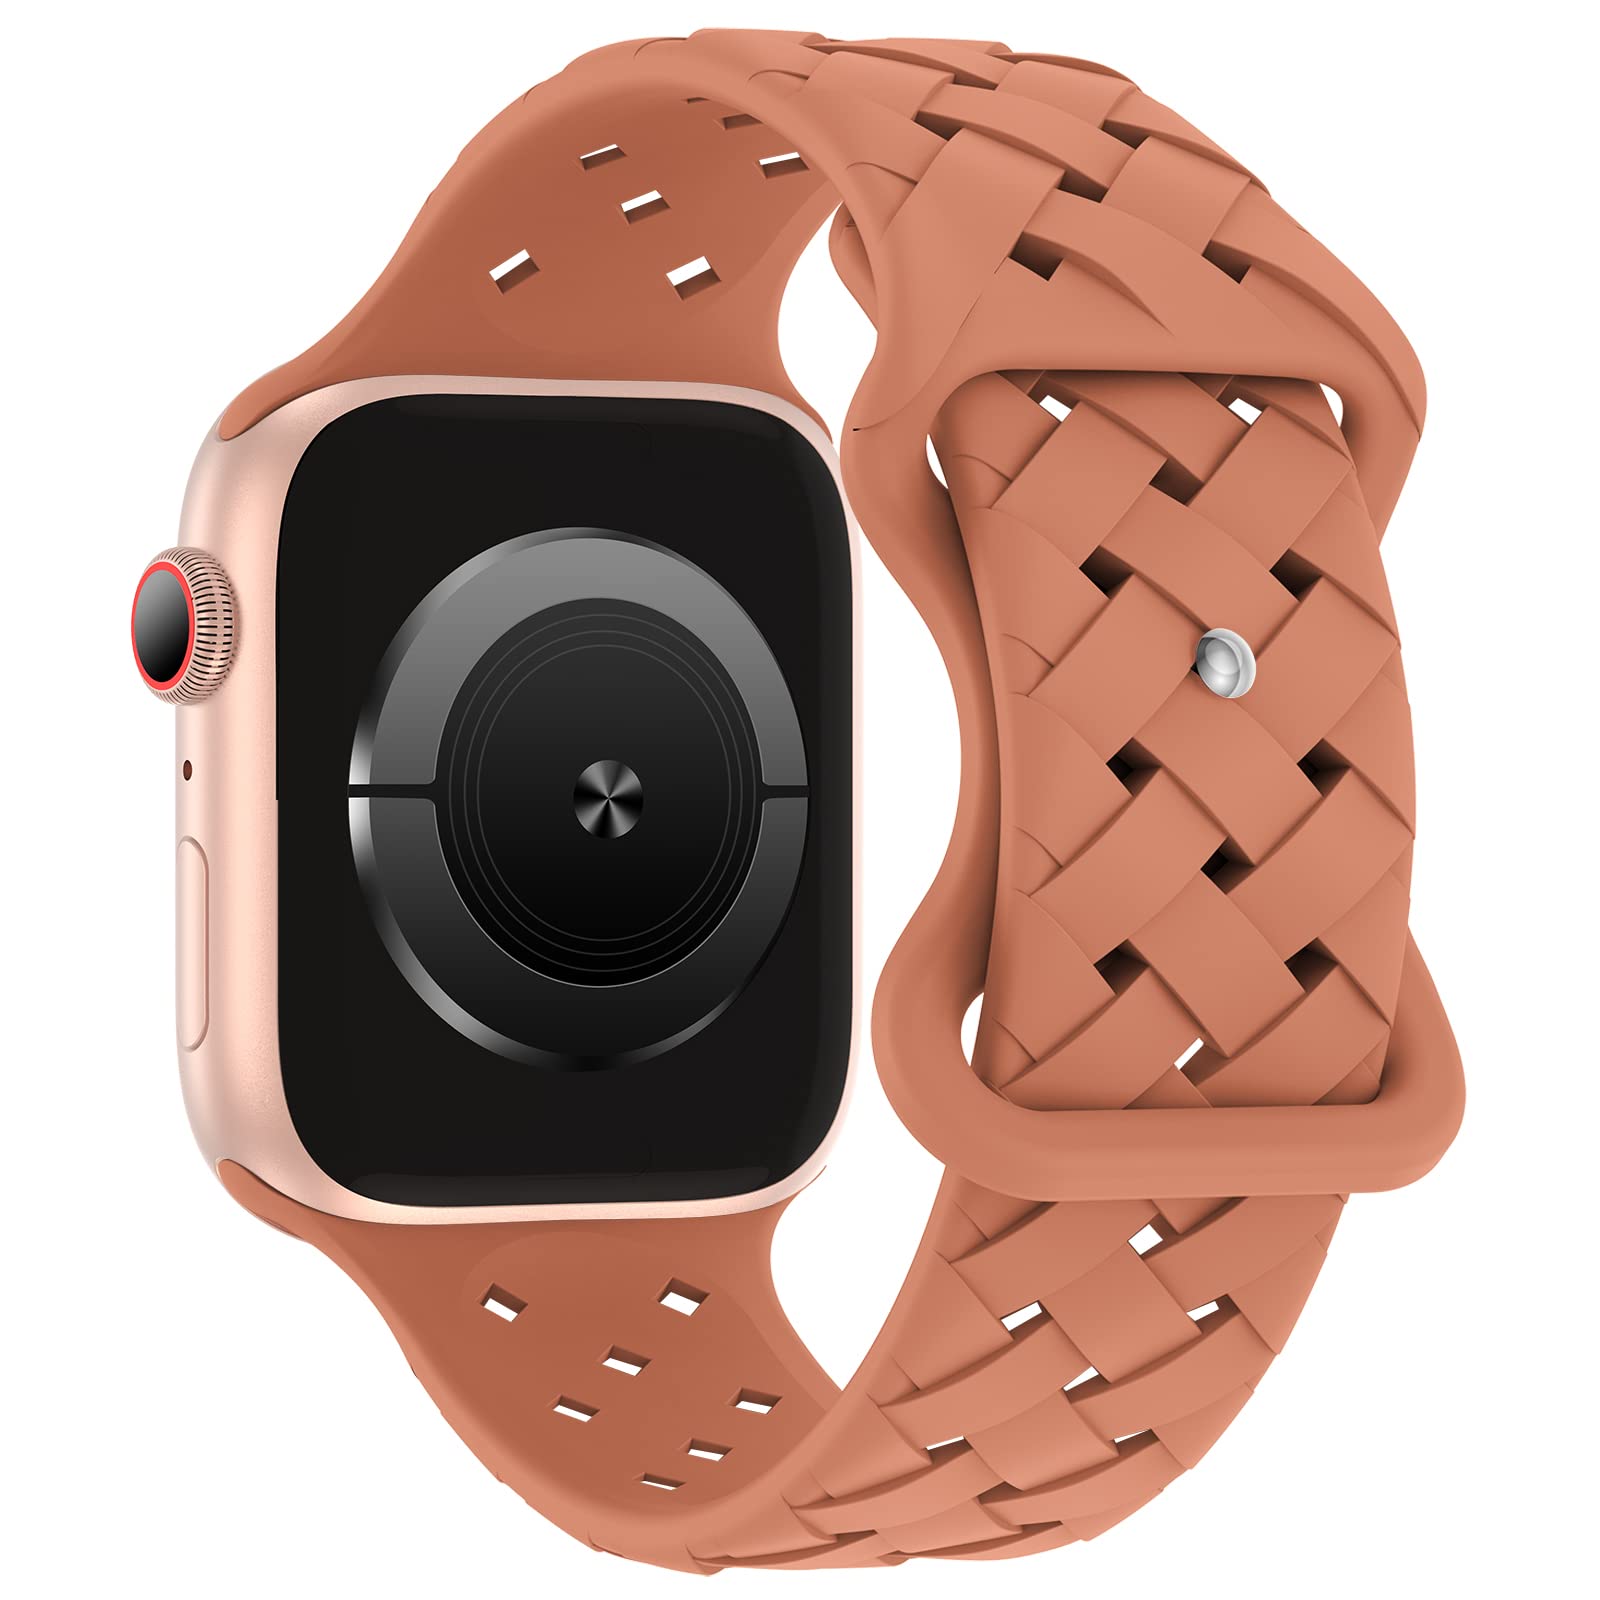 Distore Silicone Braided Weave Bands compatible with Apple Watch 38mm 40mm 41mm 42mm 44mm 45mm, Replacement Sport Breathable Str